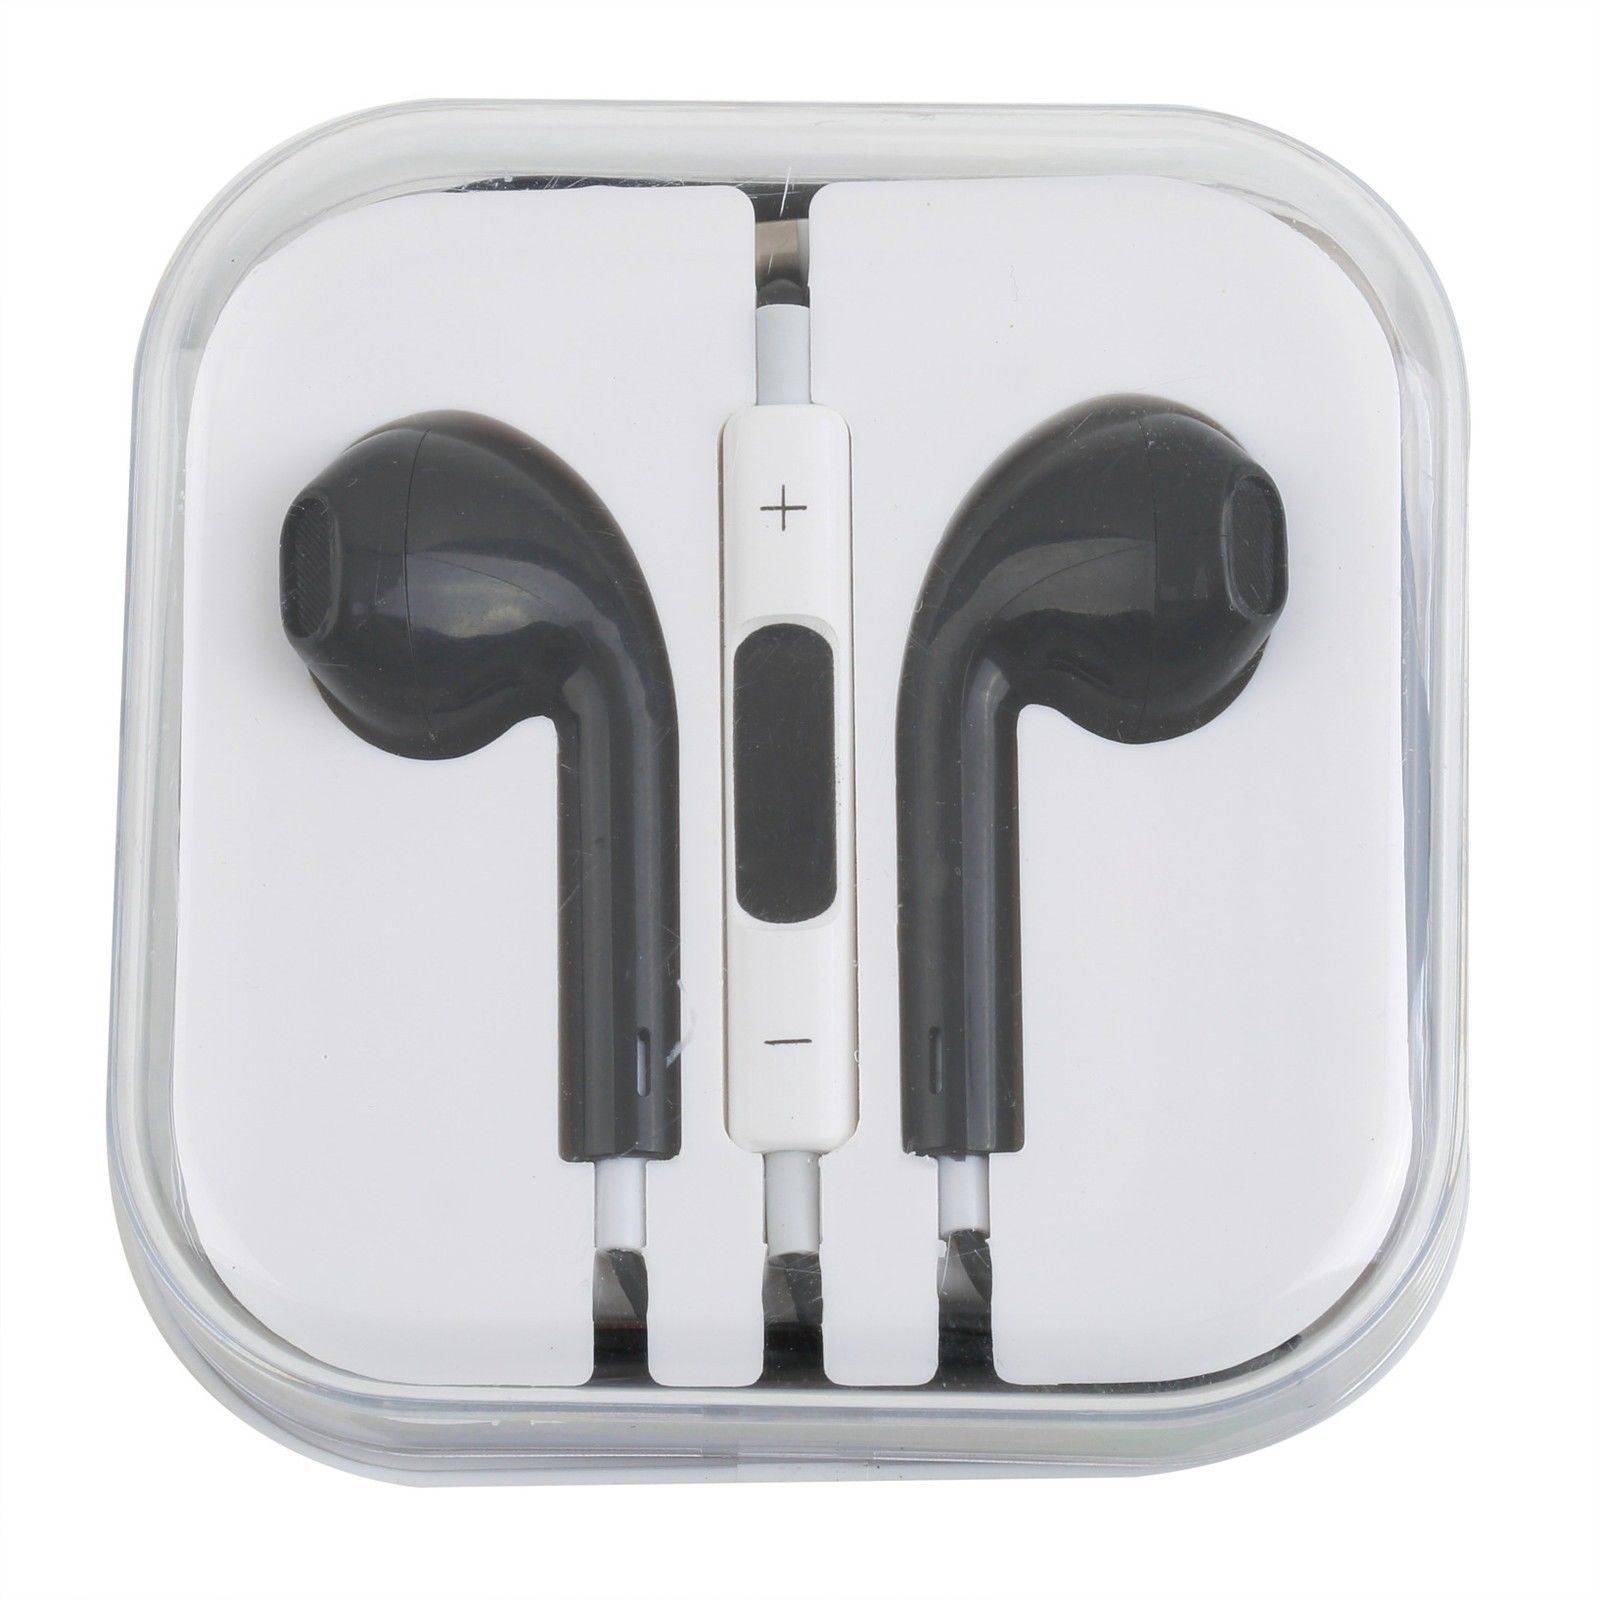 Earbud Headset Headphone with Mic for Apple iPhone 5 iphone 6 iPod ...